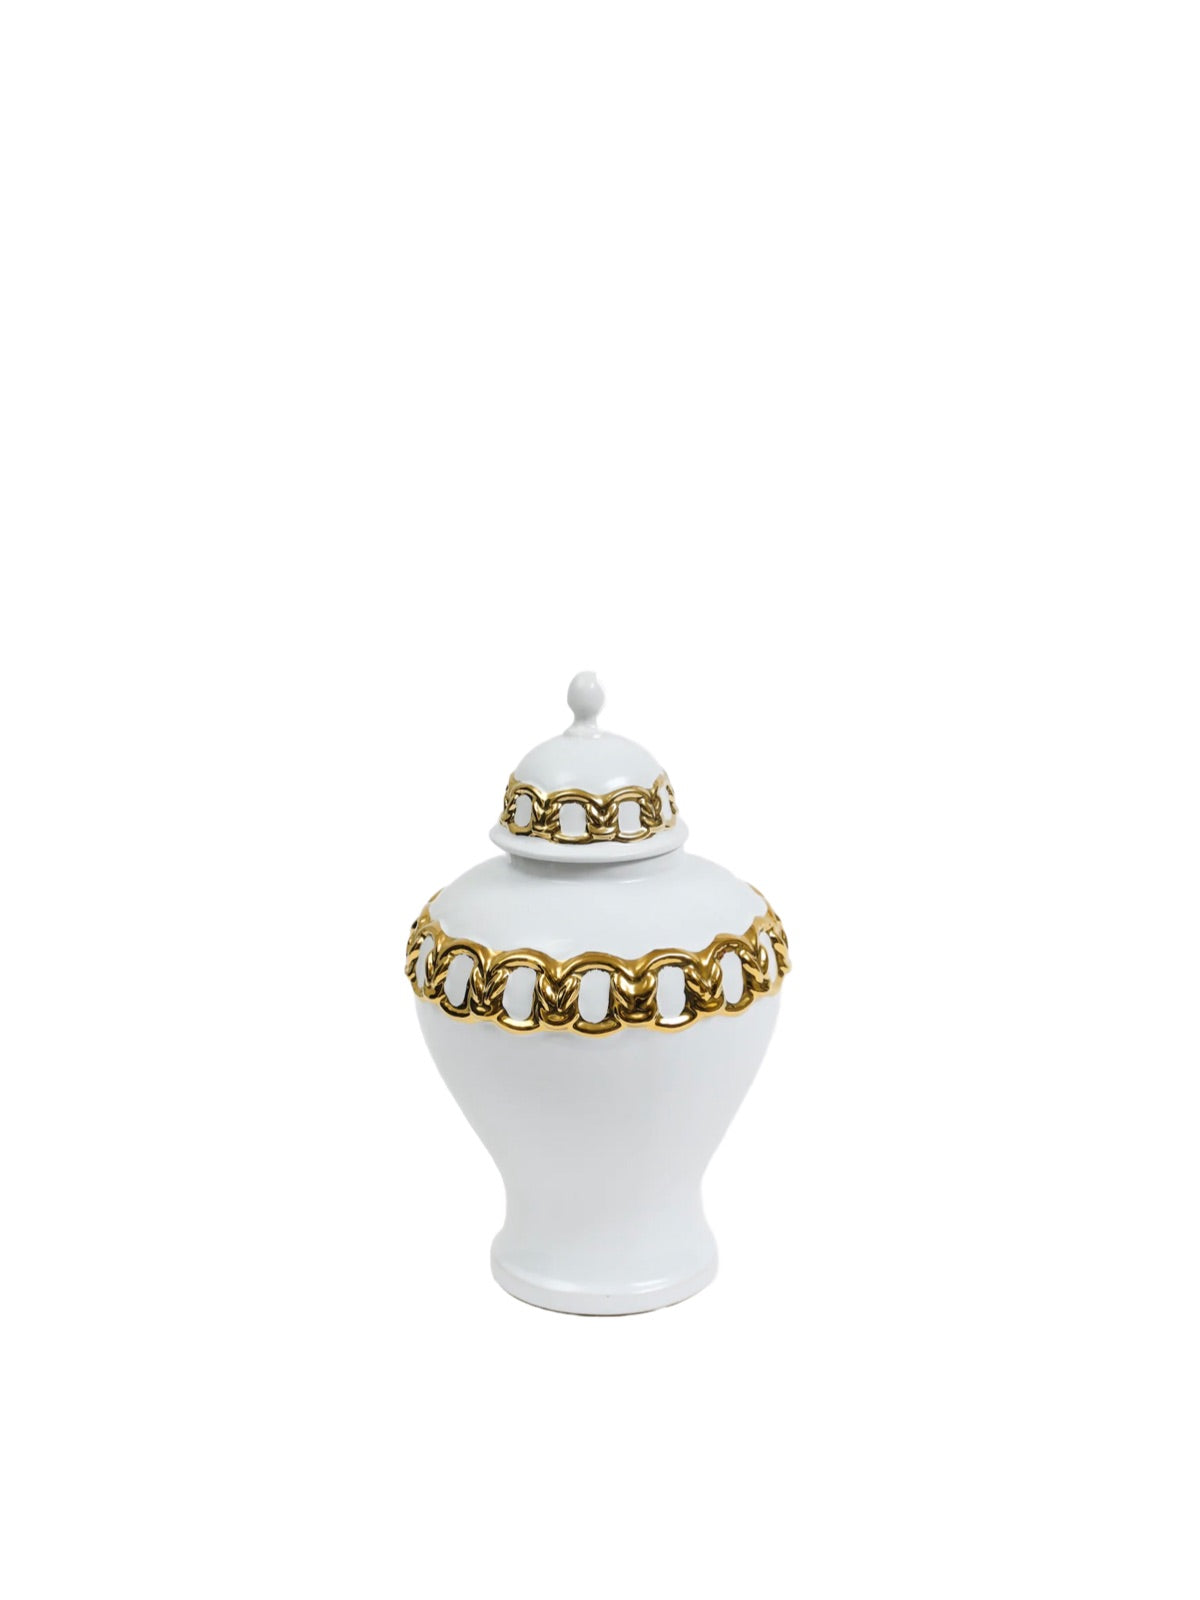 14H White Ceramic Ginger Jar with Gold Chain Details and removable lid. Sold by KYA Home Decor.